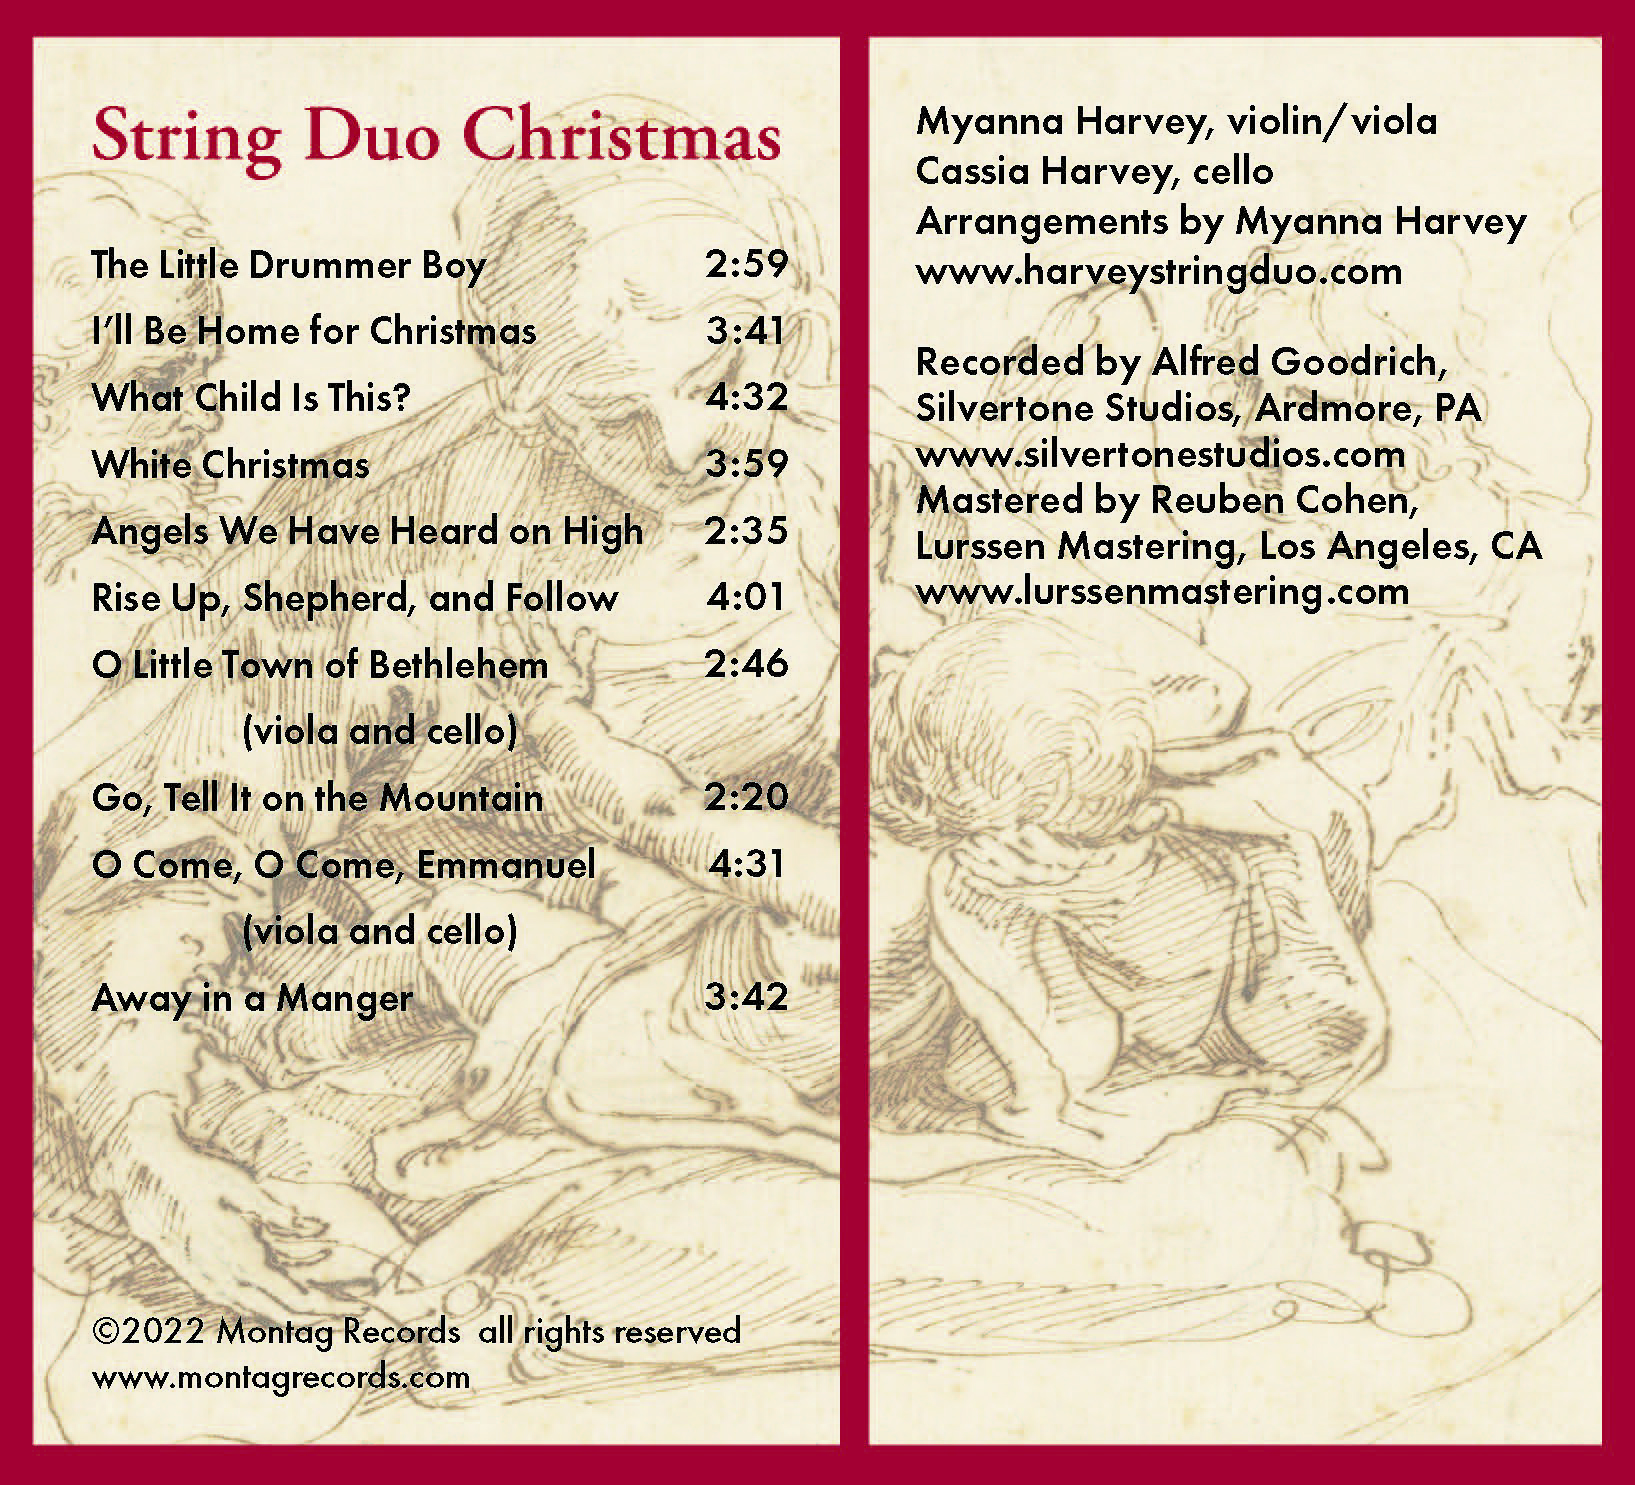 String Duo Christmas CD Back Cover